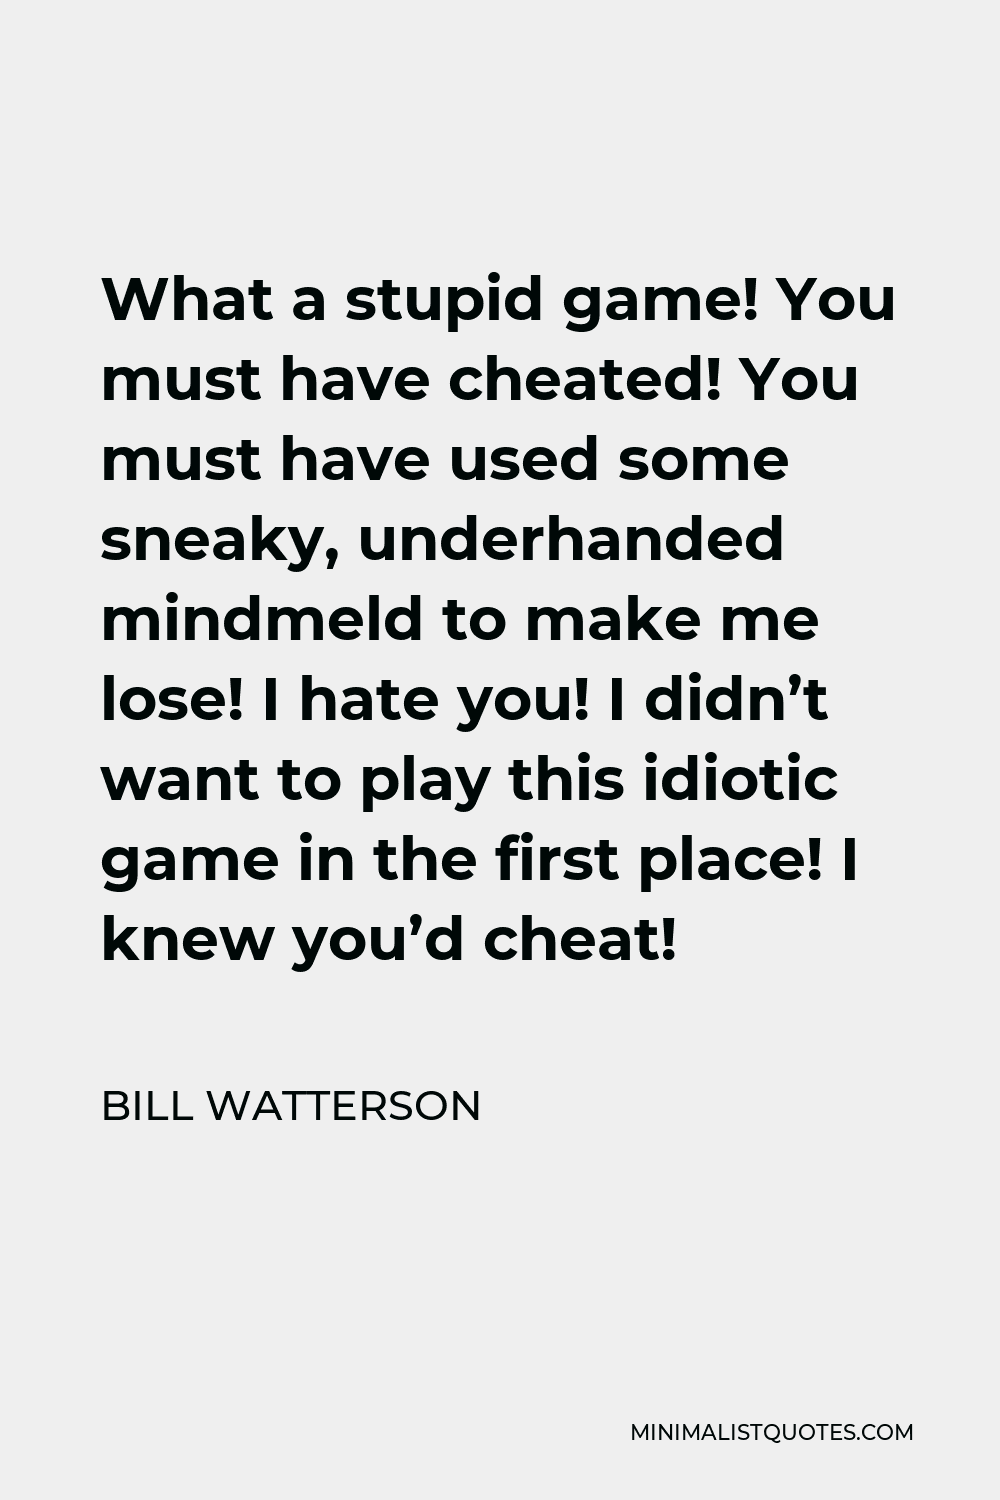 Bill Watterson Quote - What a stupid game! You must have cheated! You must have used some sneaky, underhanded mindmeld to make me lose! I hate you! I didn’t want to play this idiotic game in the first place! I knew you’d cheat!